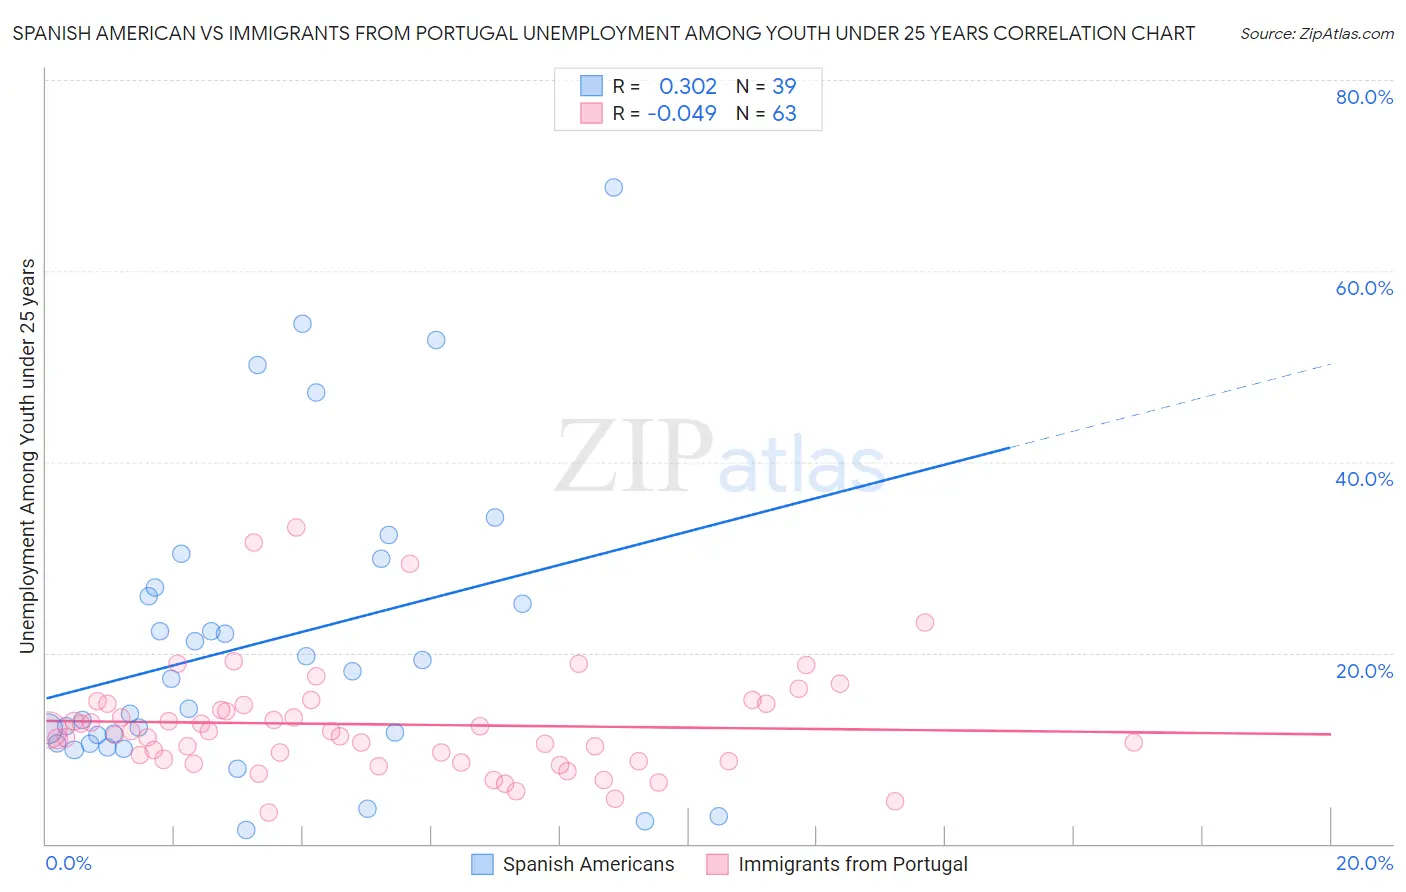 Spanish American vs Immigrants from Portugal Unemployment Among Youth under 25 years